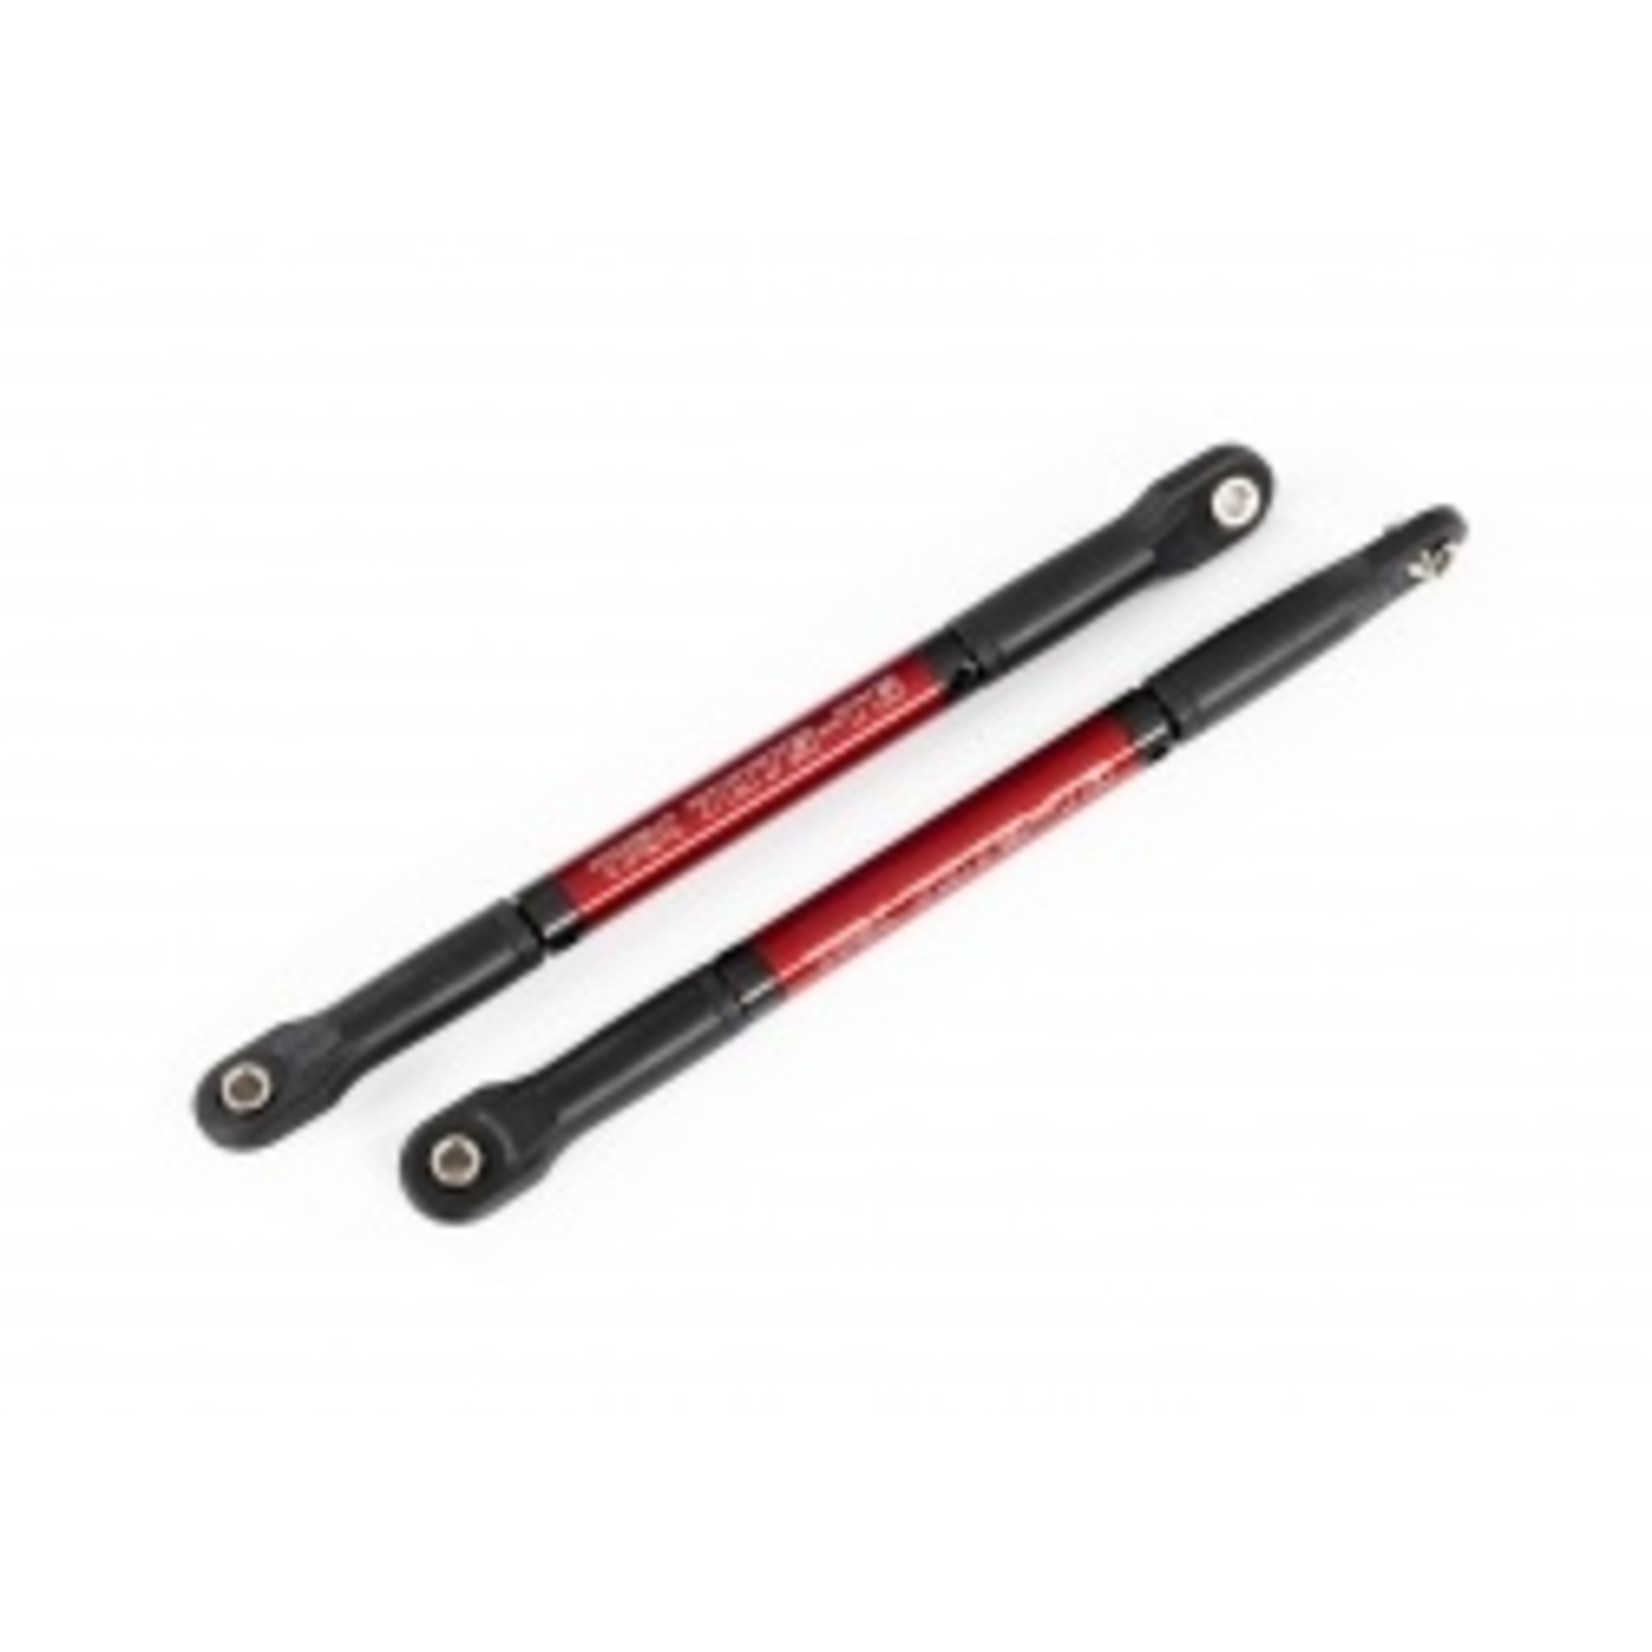 Traxxas 8619R Push rods, aluminum (red-anodized), heavy duty (2) (assembled with rod ends and threaded inserts)